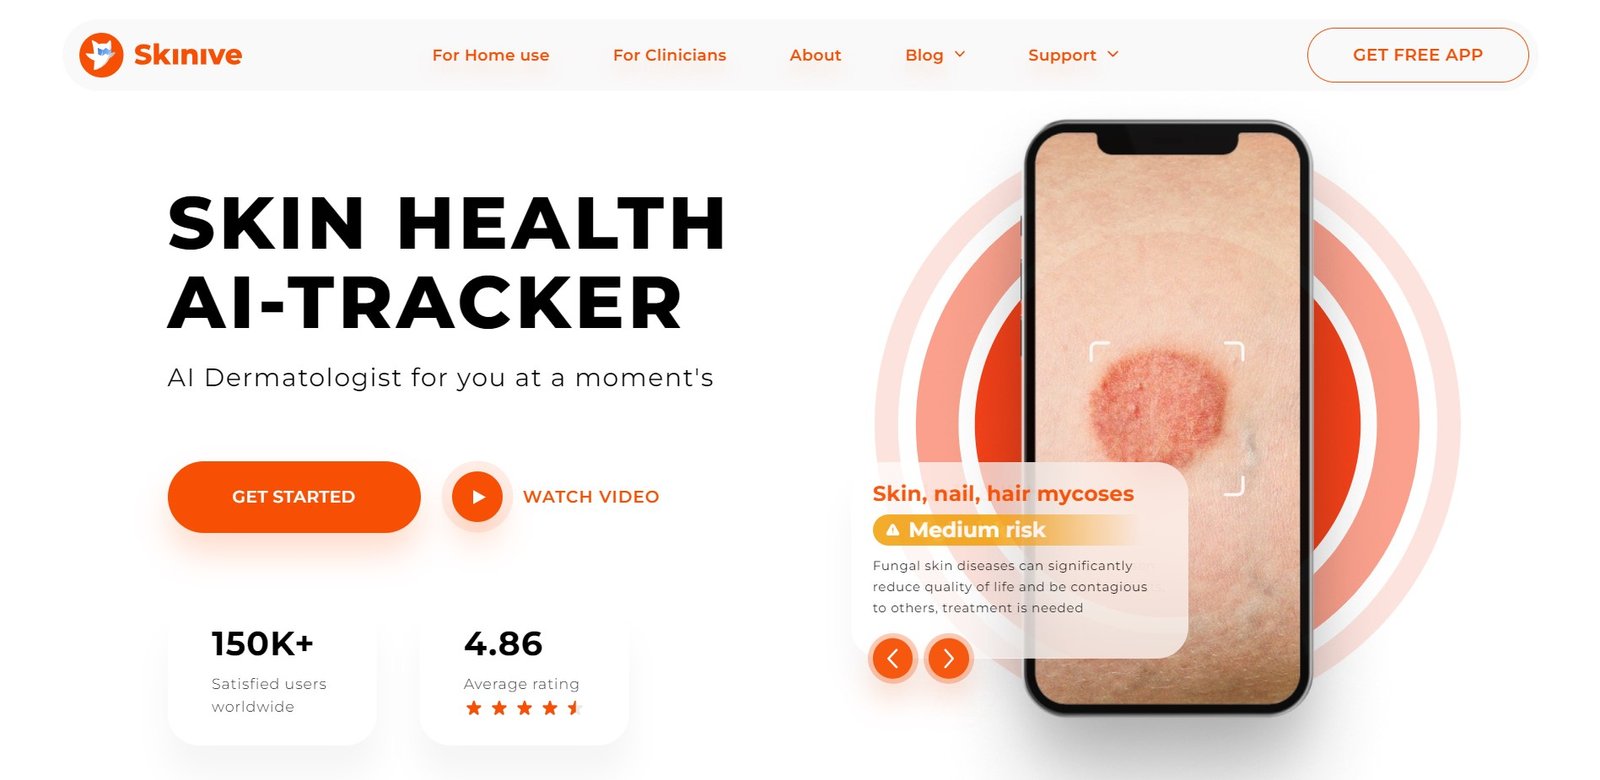 Skinive is an innovative AI-driven mobile app designed to enhance your skin health tracking and care